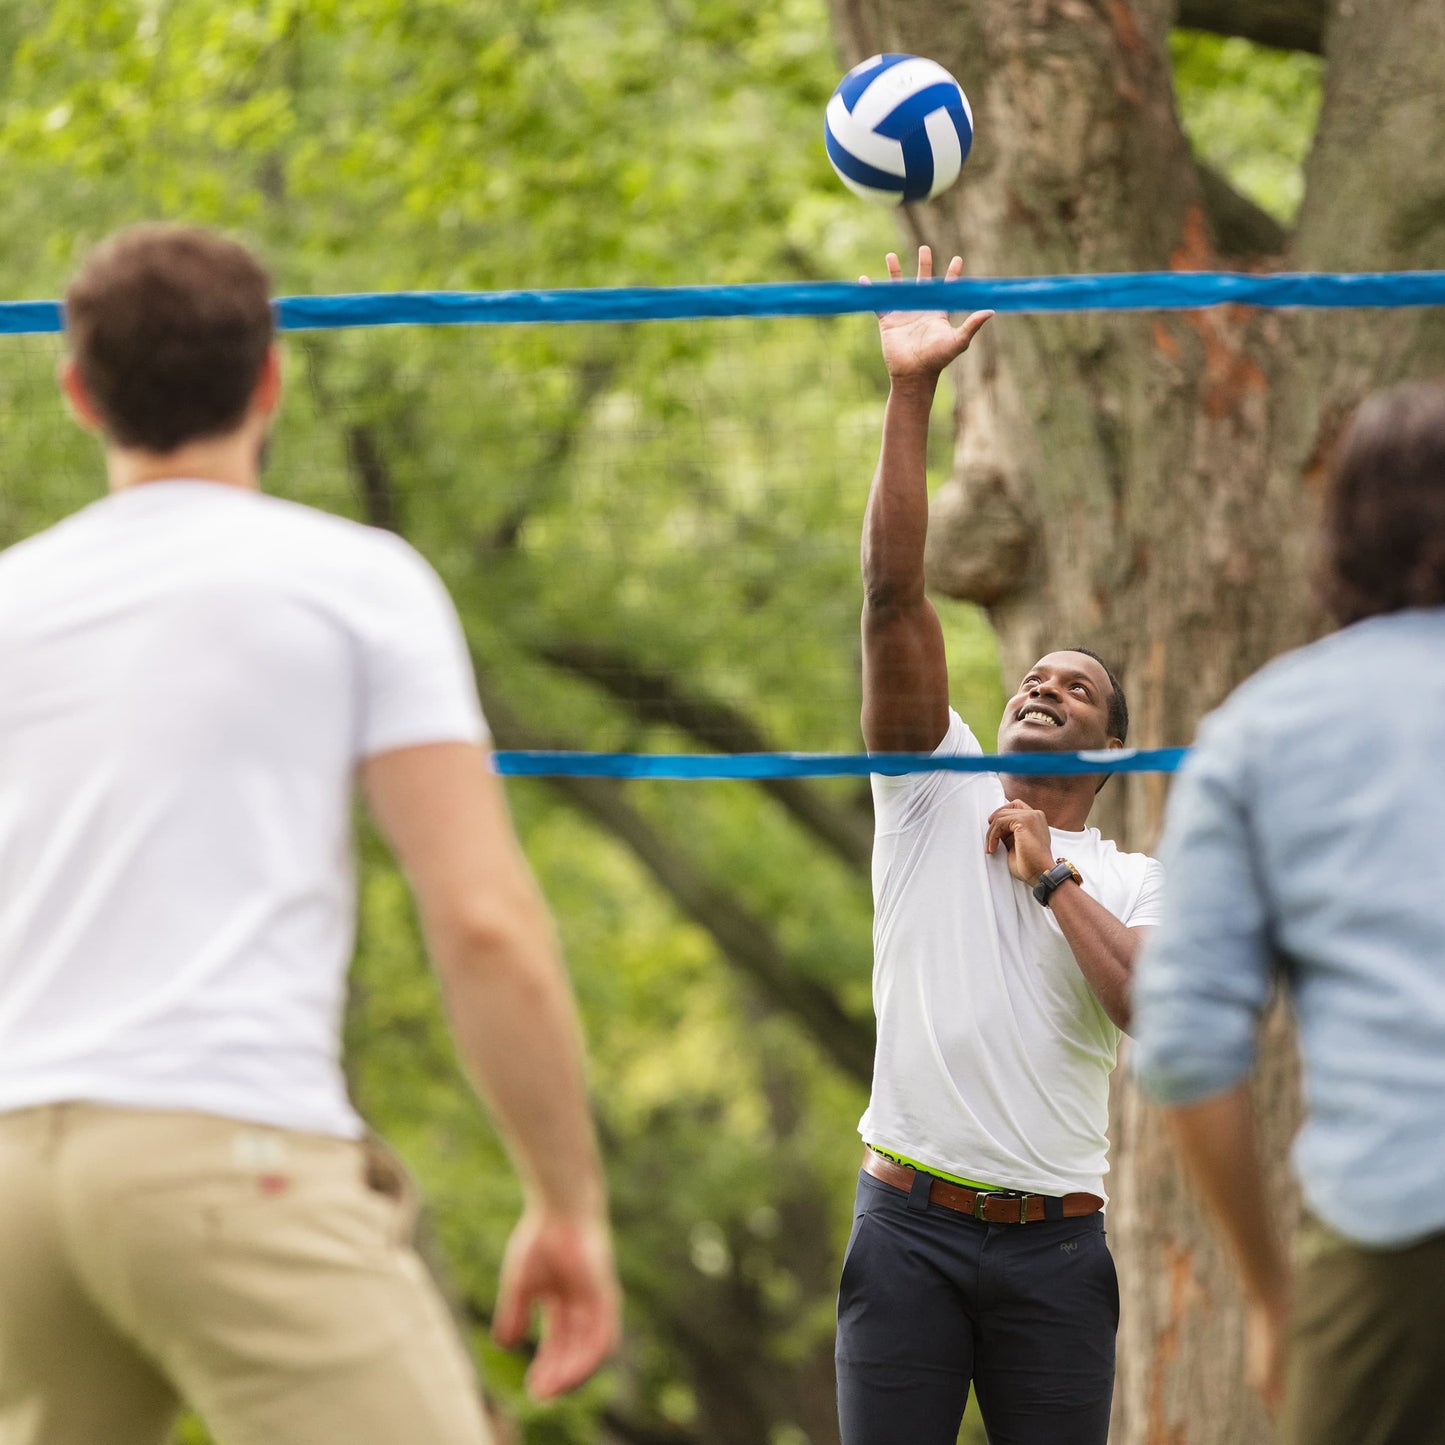 Sportcraft Badminton Volley Ball Set  - Lifestyle Image - Men playing Volley Ball in a park